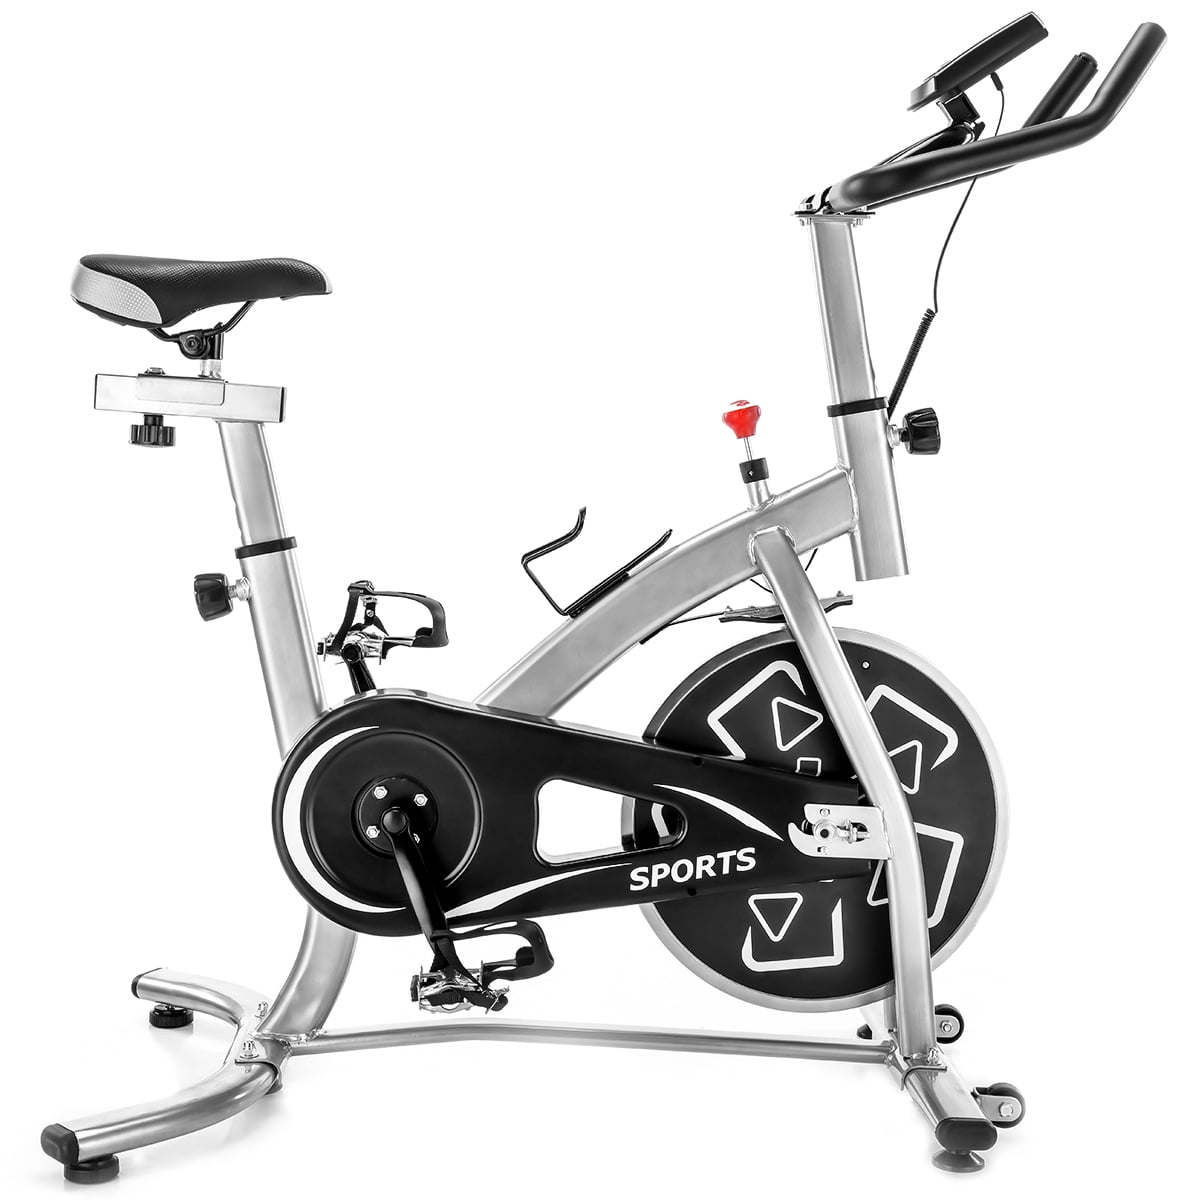 DASUN GT Stationary Professional Indoor Cycling Bike S280 Trainer Exercise Bicycle with 24 lbs. Flywheel,Sliver